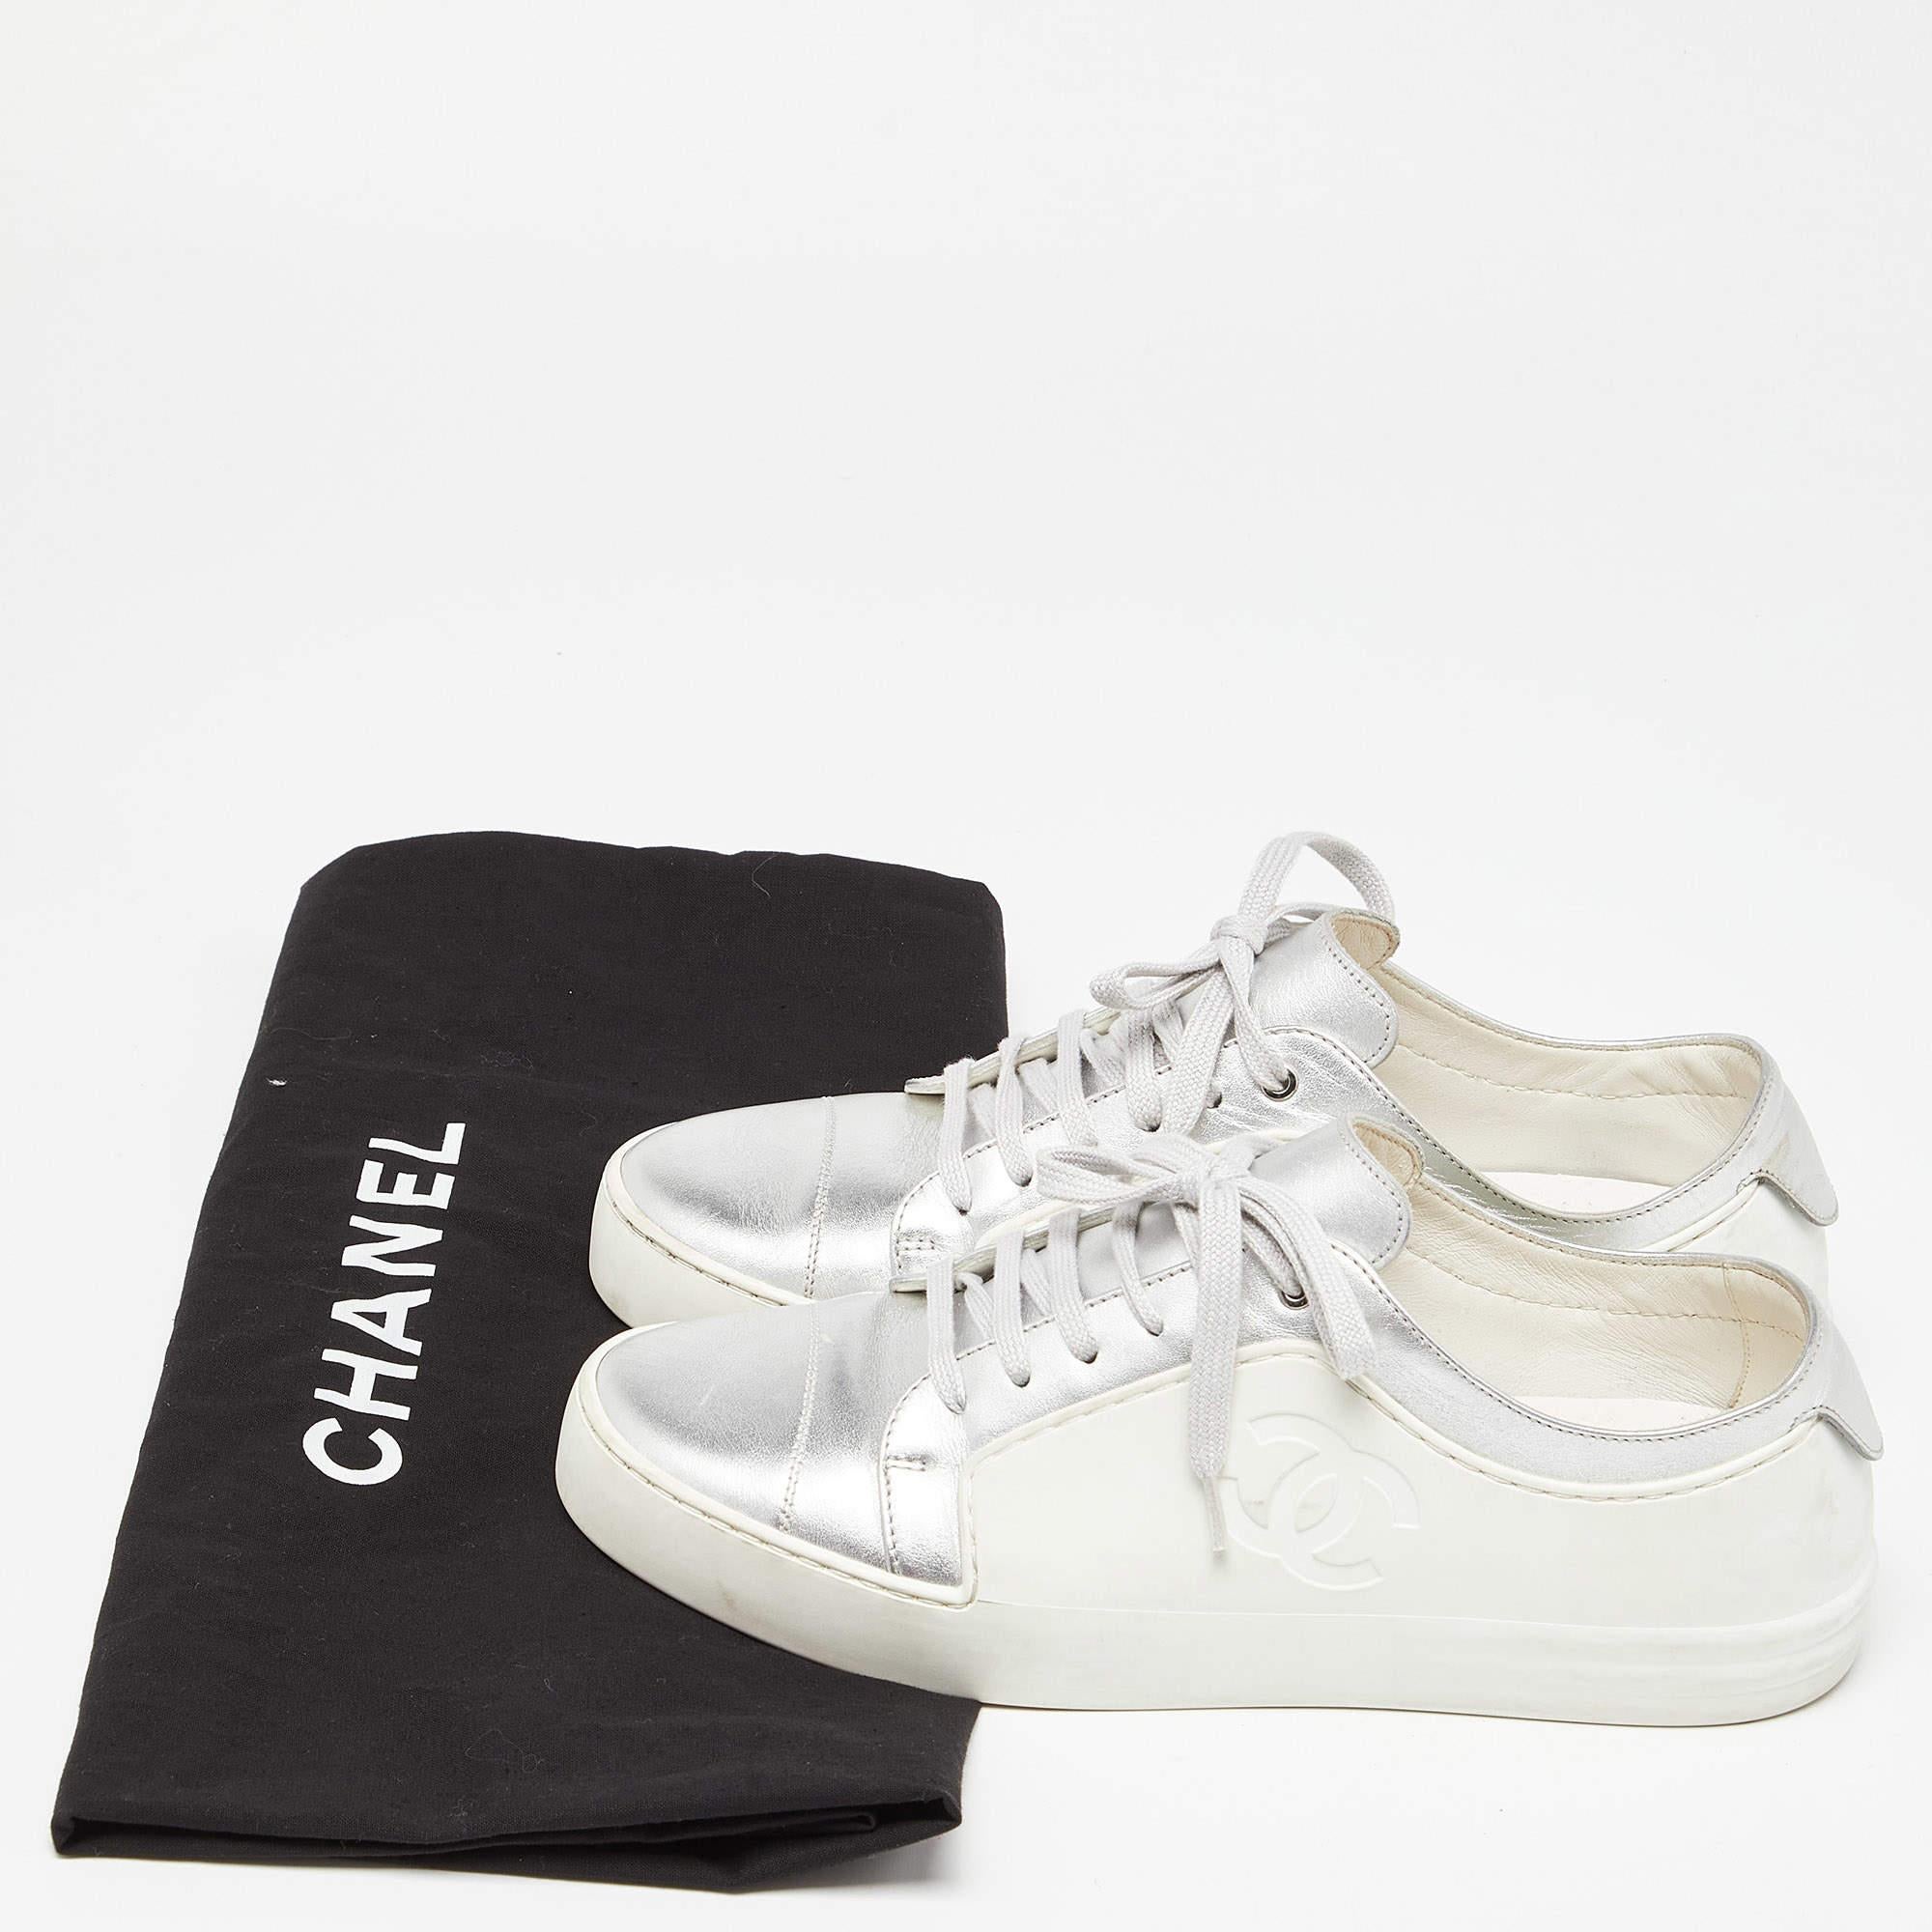 Chanel White/Silver Rubber and Leather CC Low Top Sneakers Size 39 5